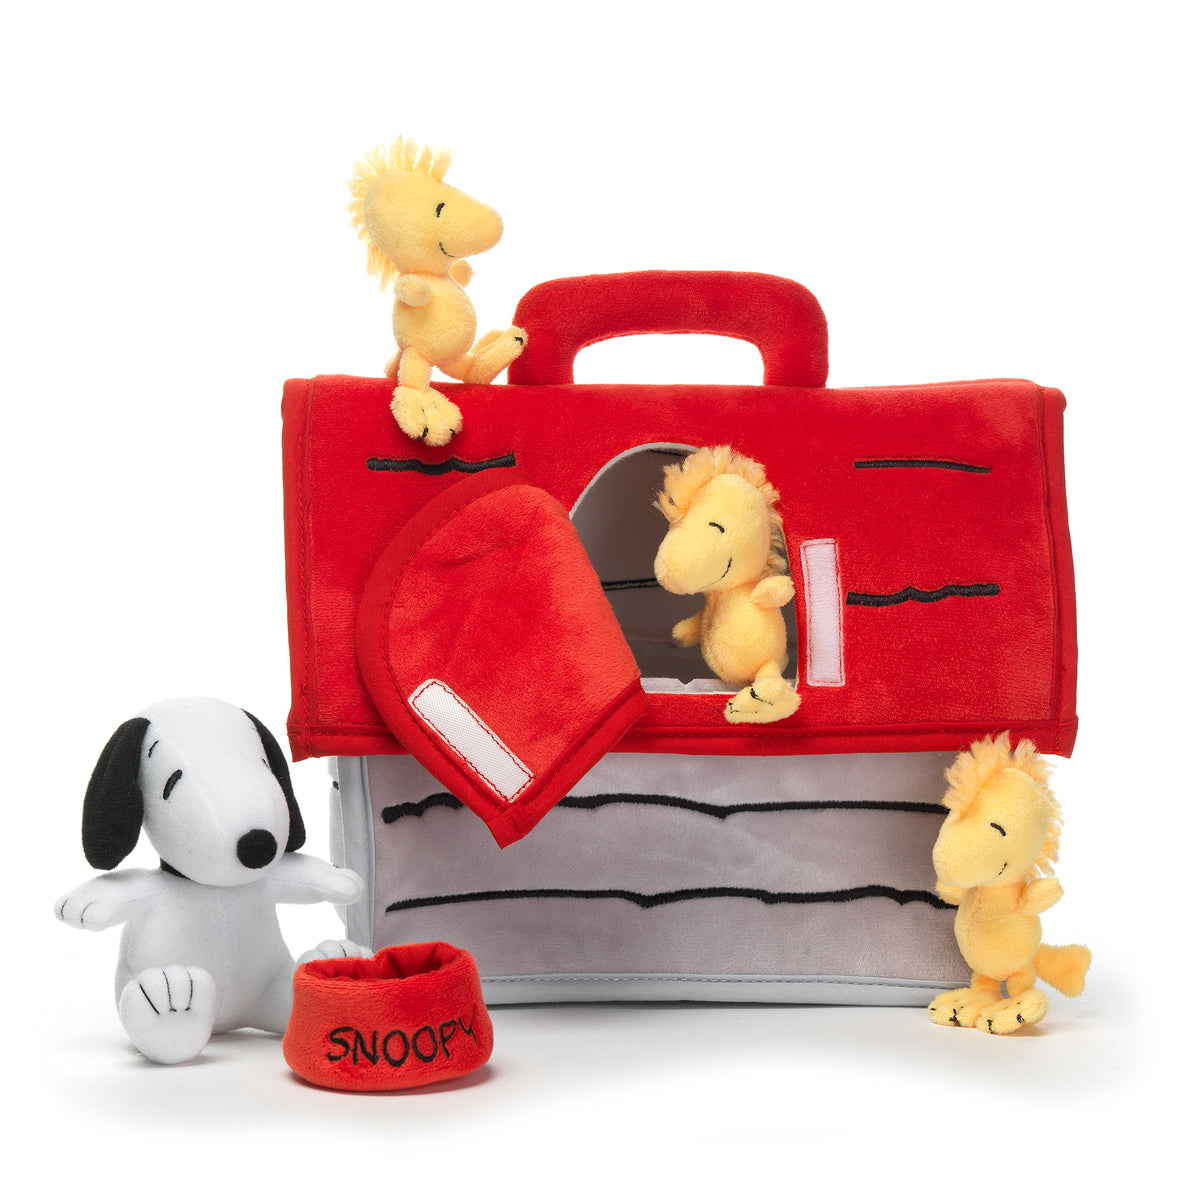 Classic Snoopy Interactive Plush Toy Doghouse with Animals